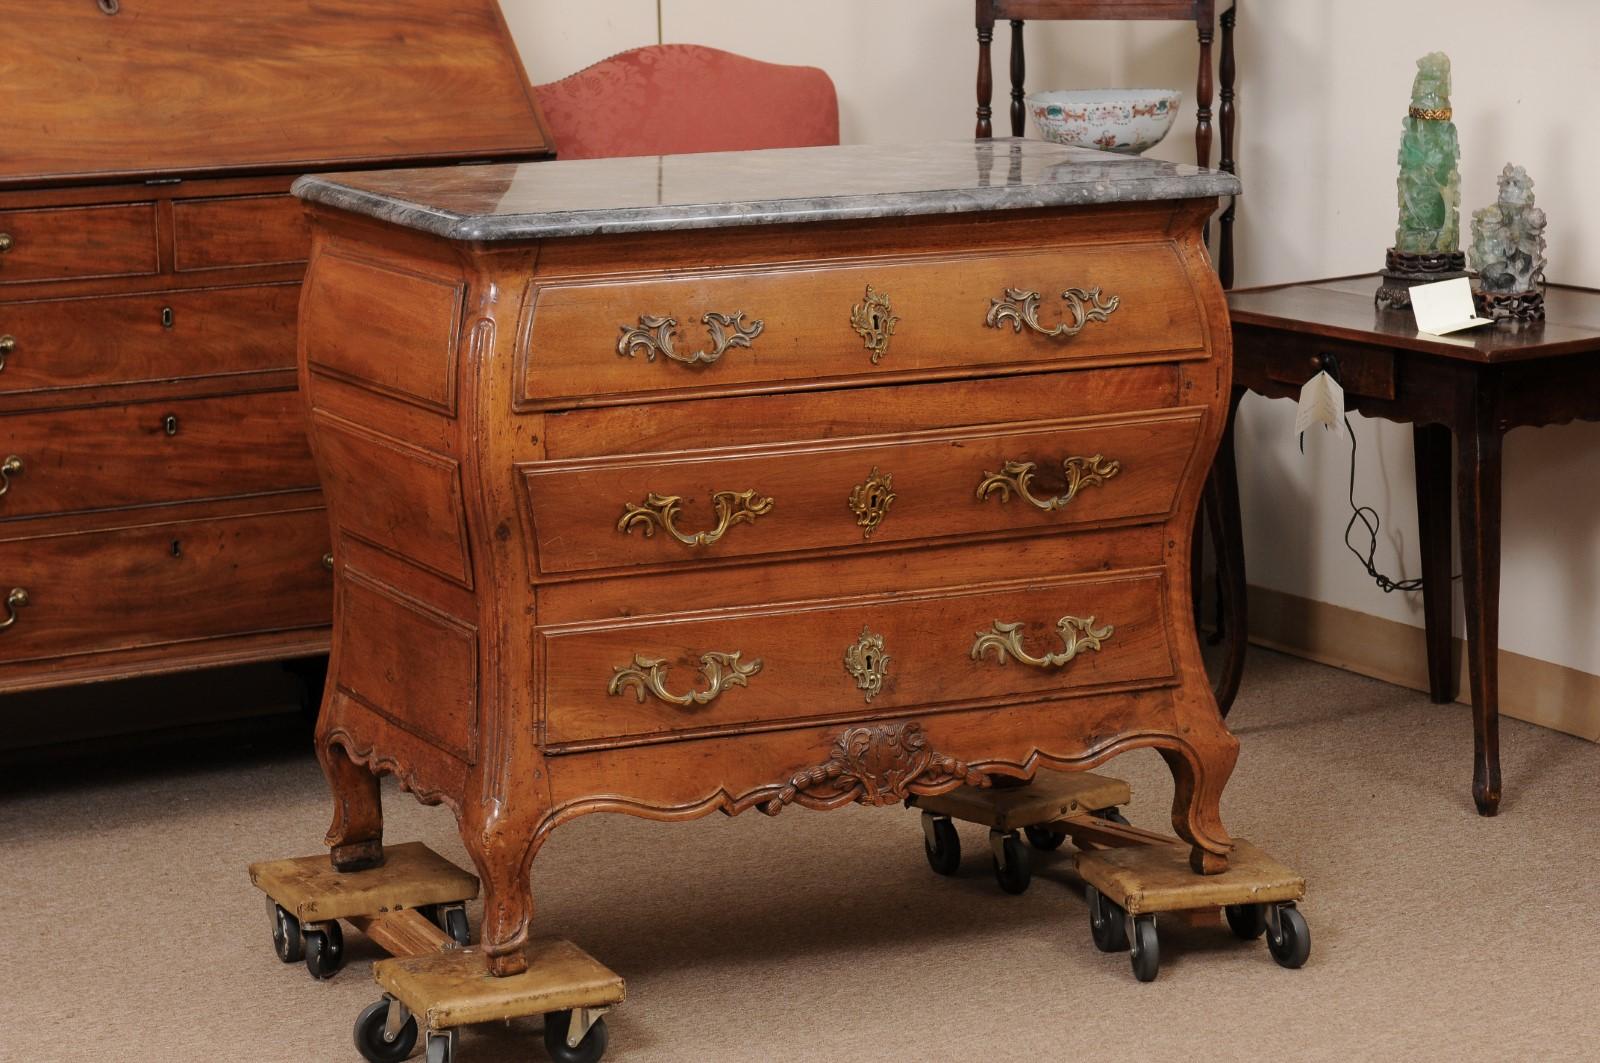  Mid 18th Century French Louis XV Walnut Commode w/ Bombe Form & Grey Marble Top In Good Condition For Sale In Atlanta, GA